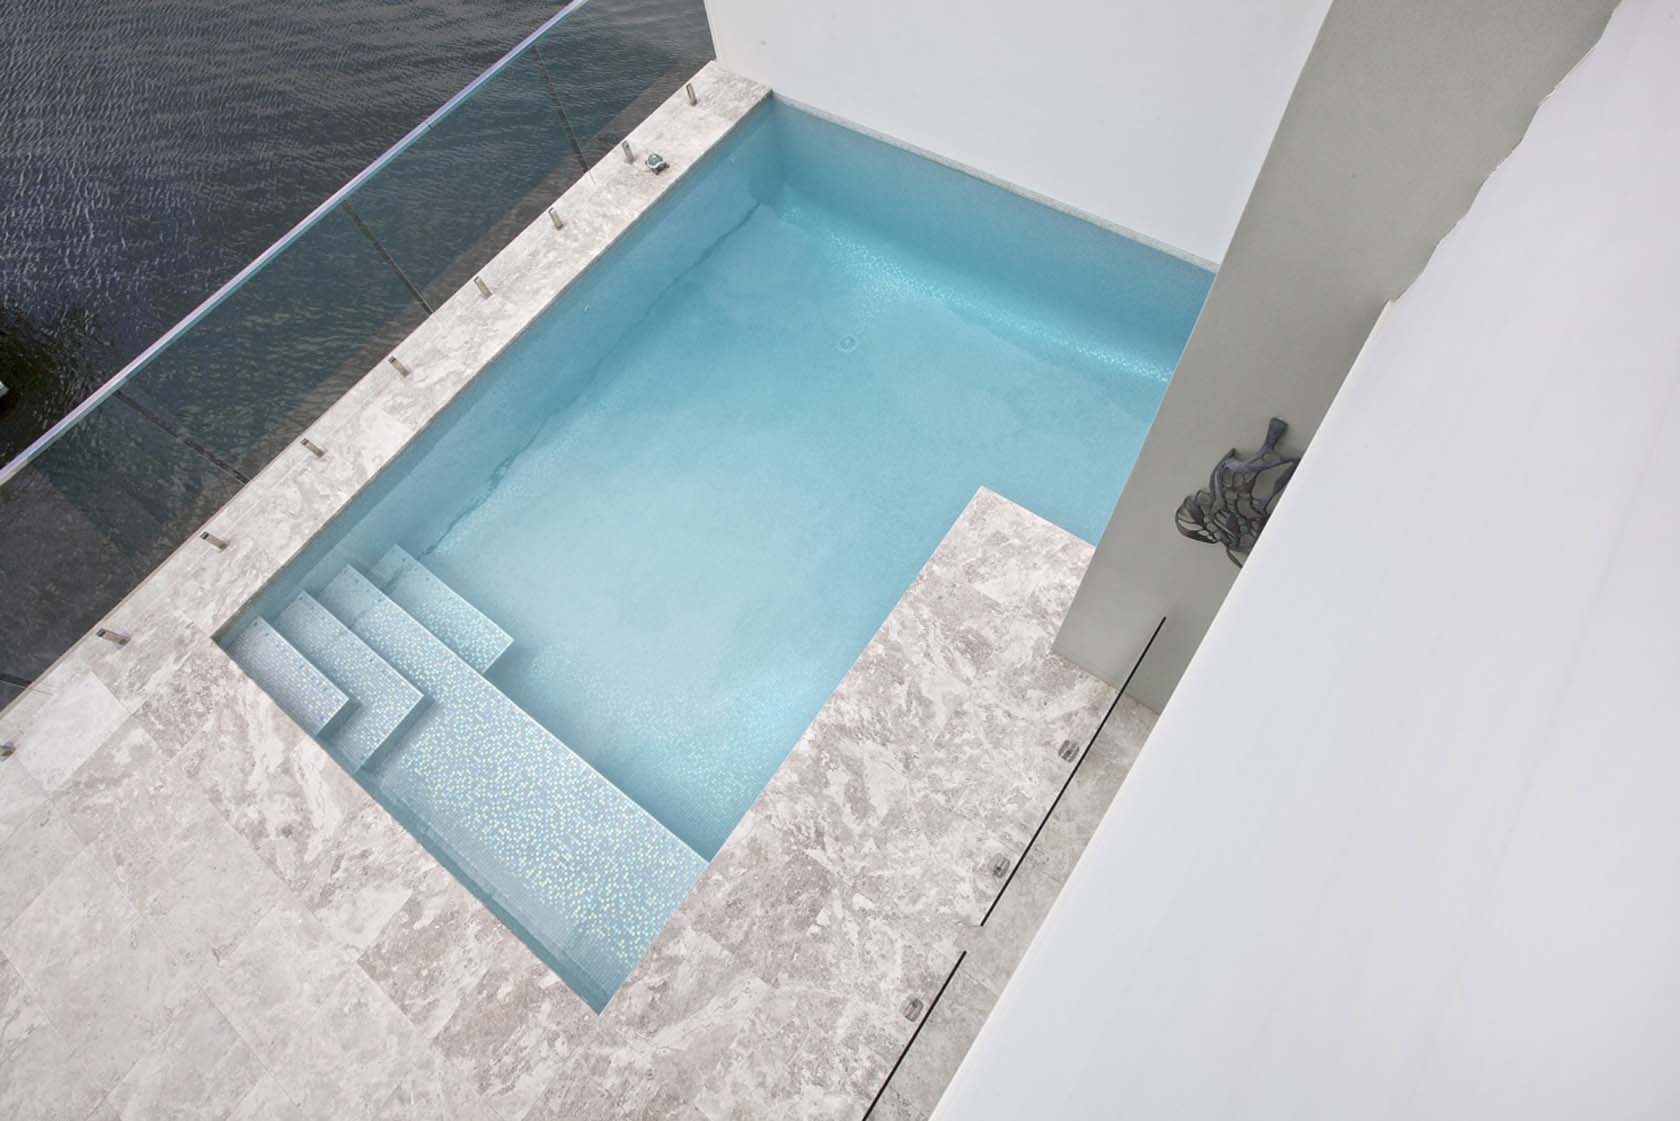 GCR305 White Crystal Pearl Blend fully tiled pool with Silver Marble